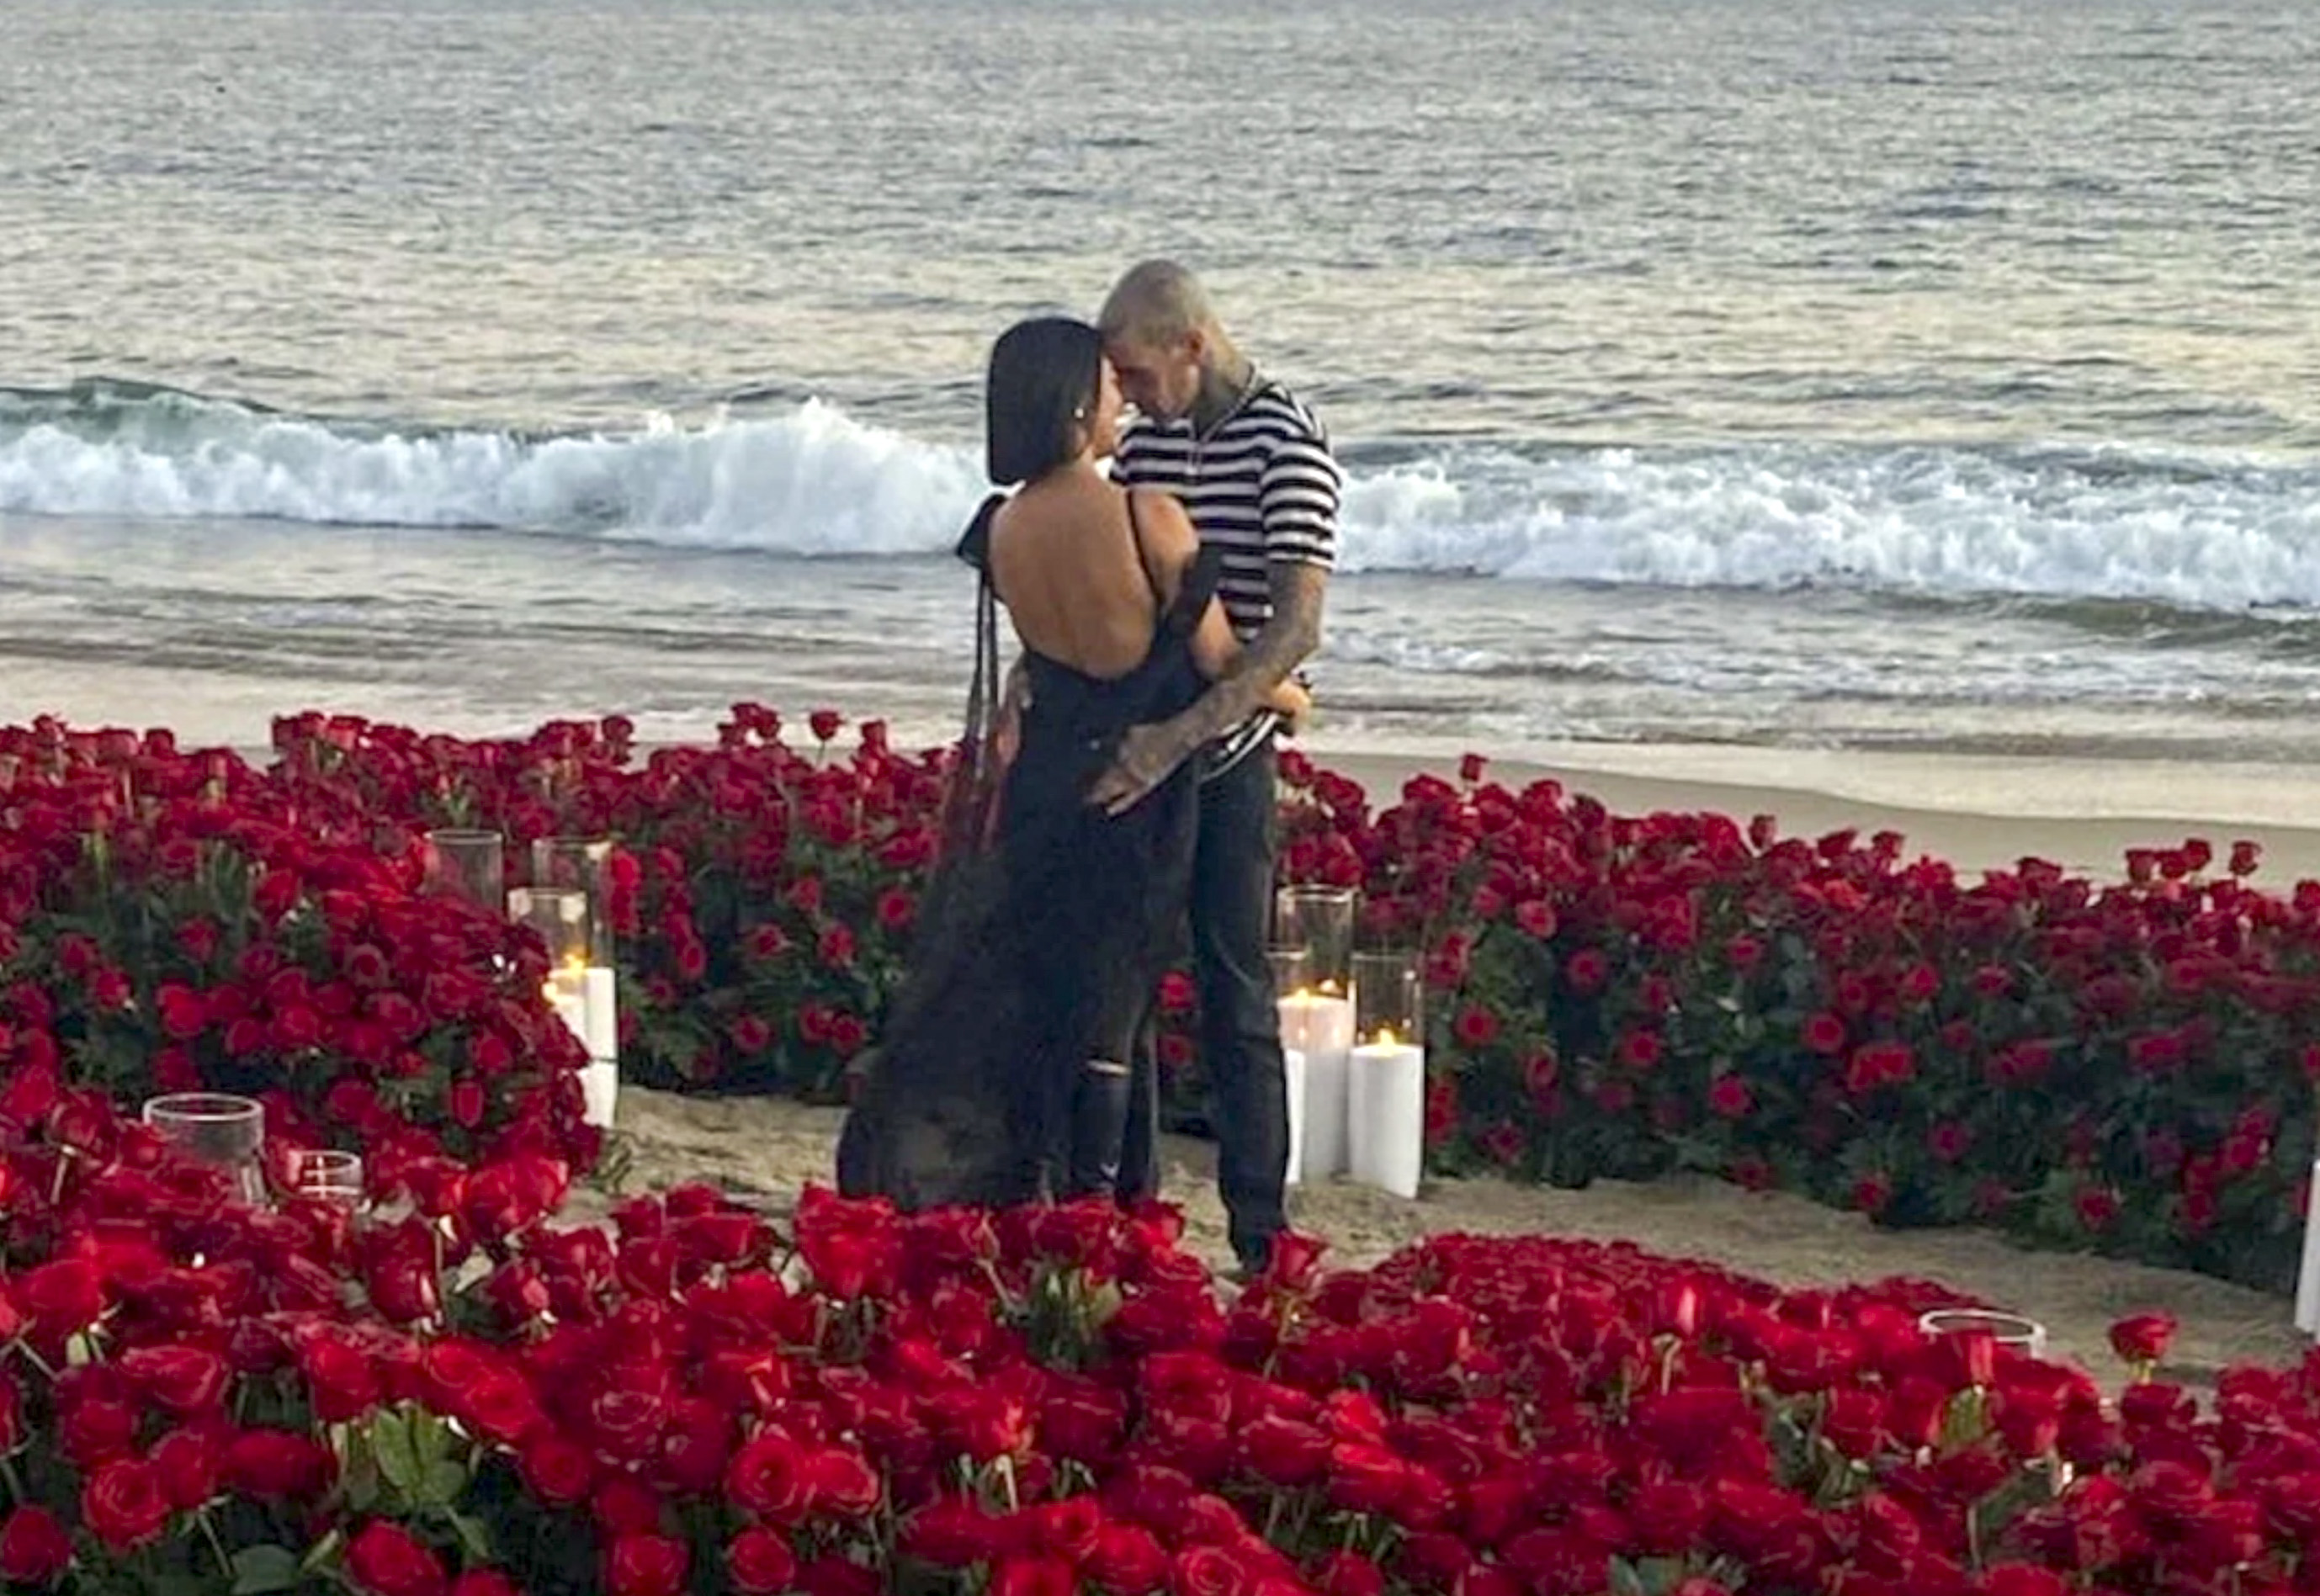 Travis Barker proposed to Kourtney Kardashian with an expensive ring.